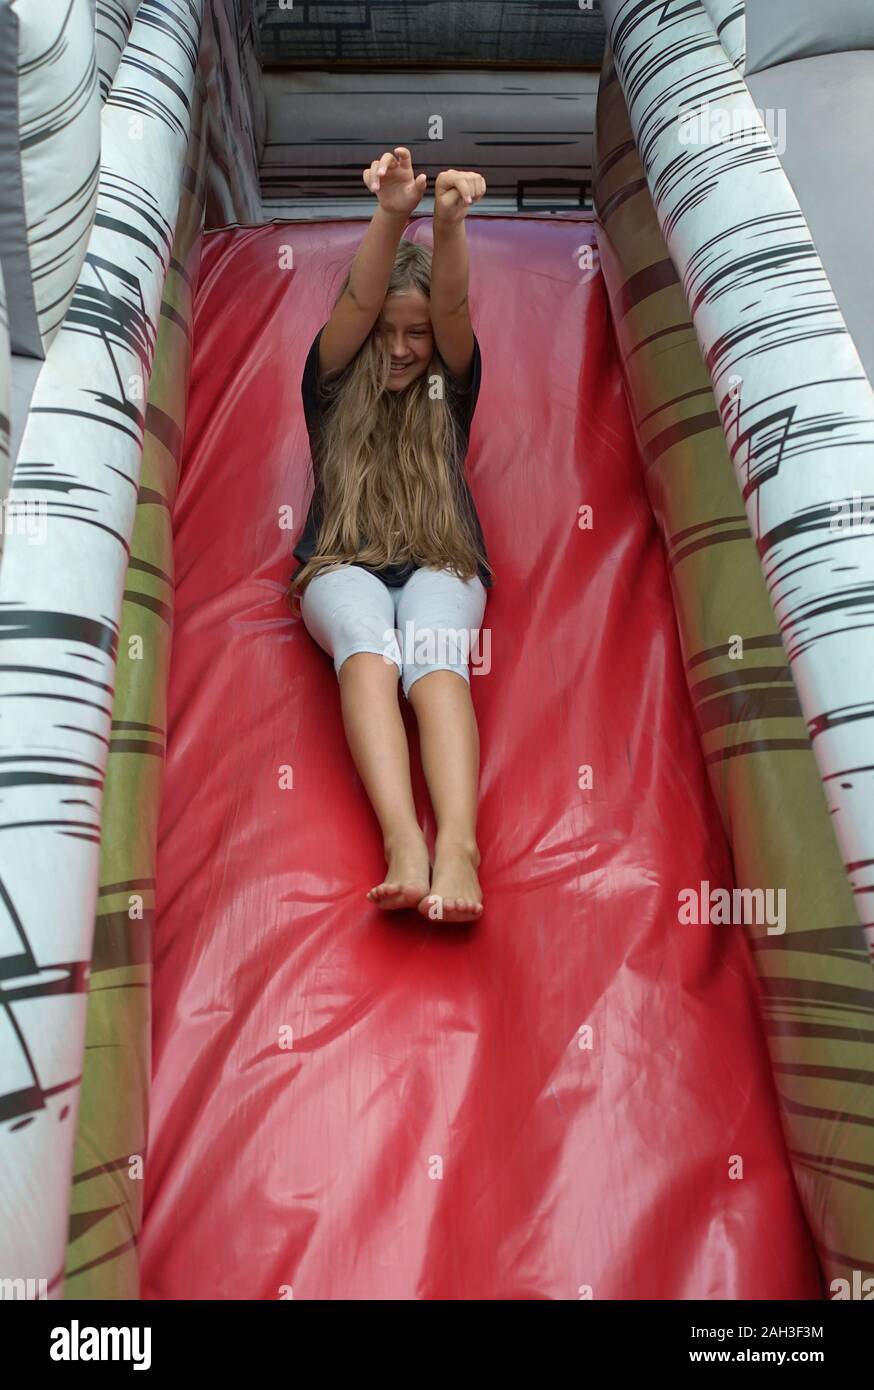 Young Girl on inflatable toy in amusement park Banque D'Images